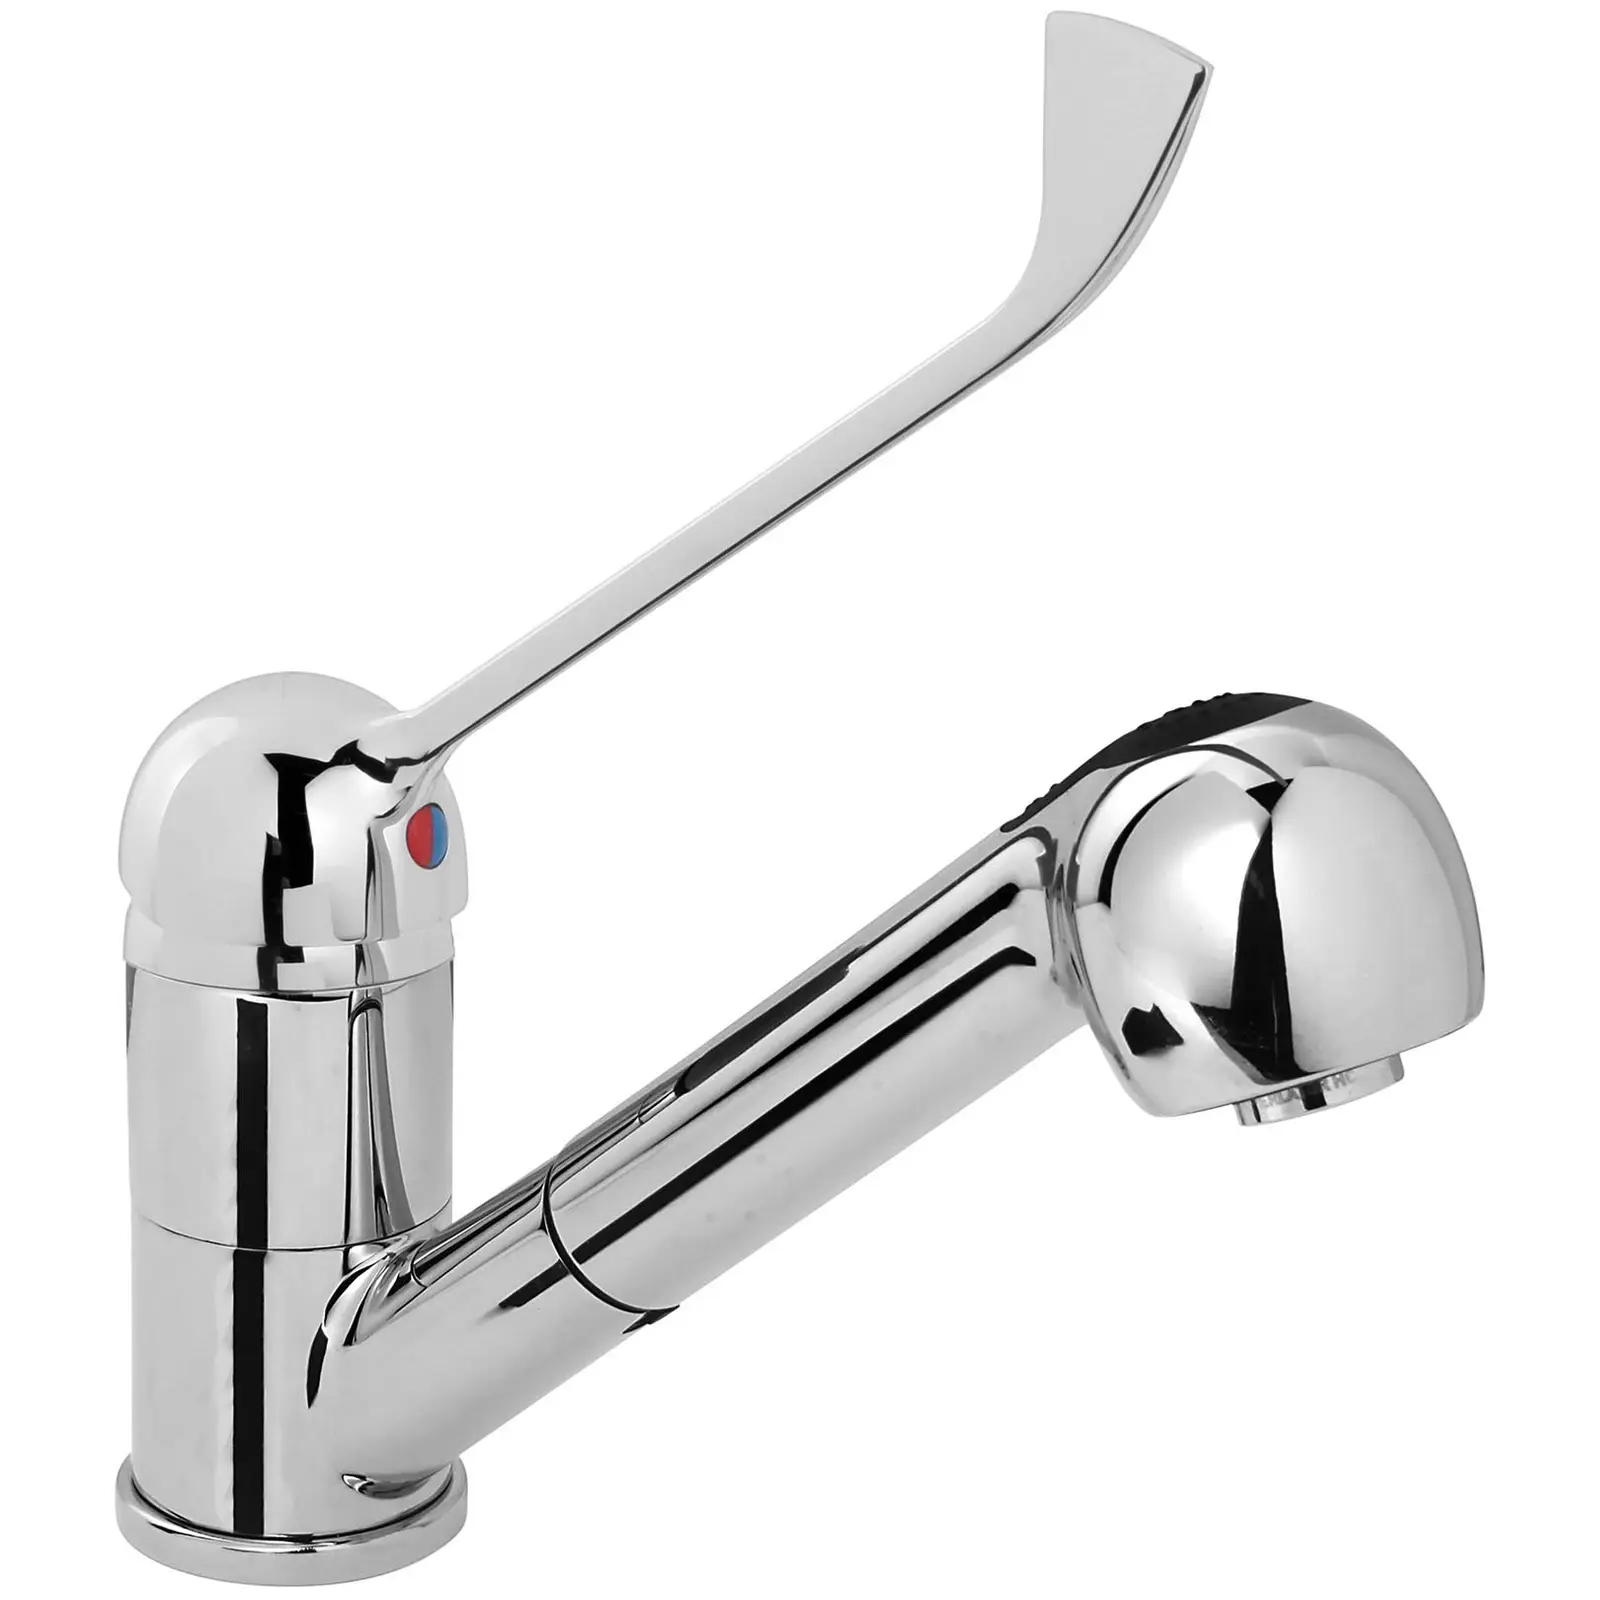 Kitchen Sink Mixer Tap - integrated hose - water tap 215 mm - chrome-plated brass